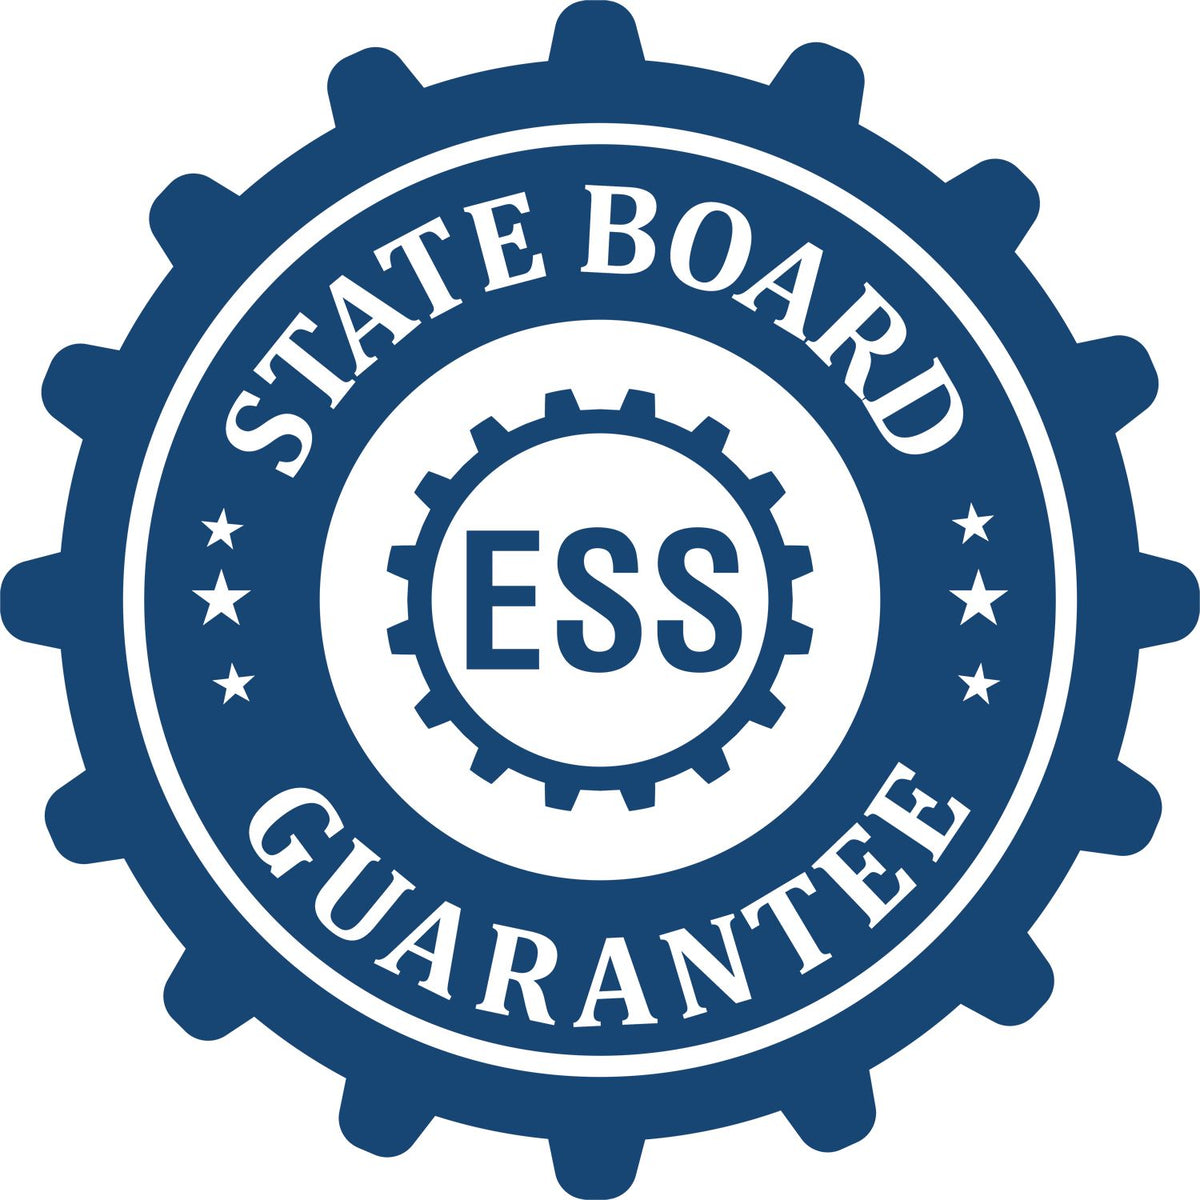 An emblem in a gear shape illustrating a state board guarantee for the State of Maryland Extended Long Reach Geologist Seal